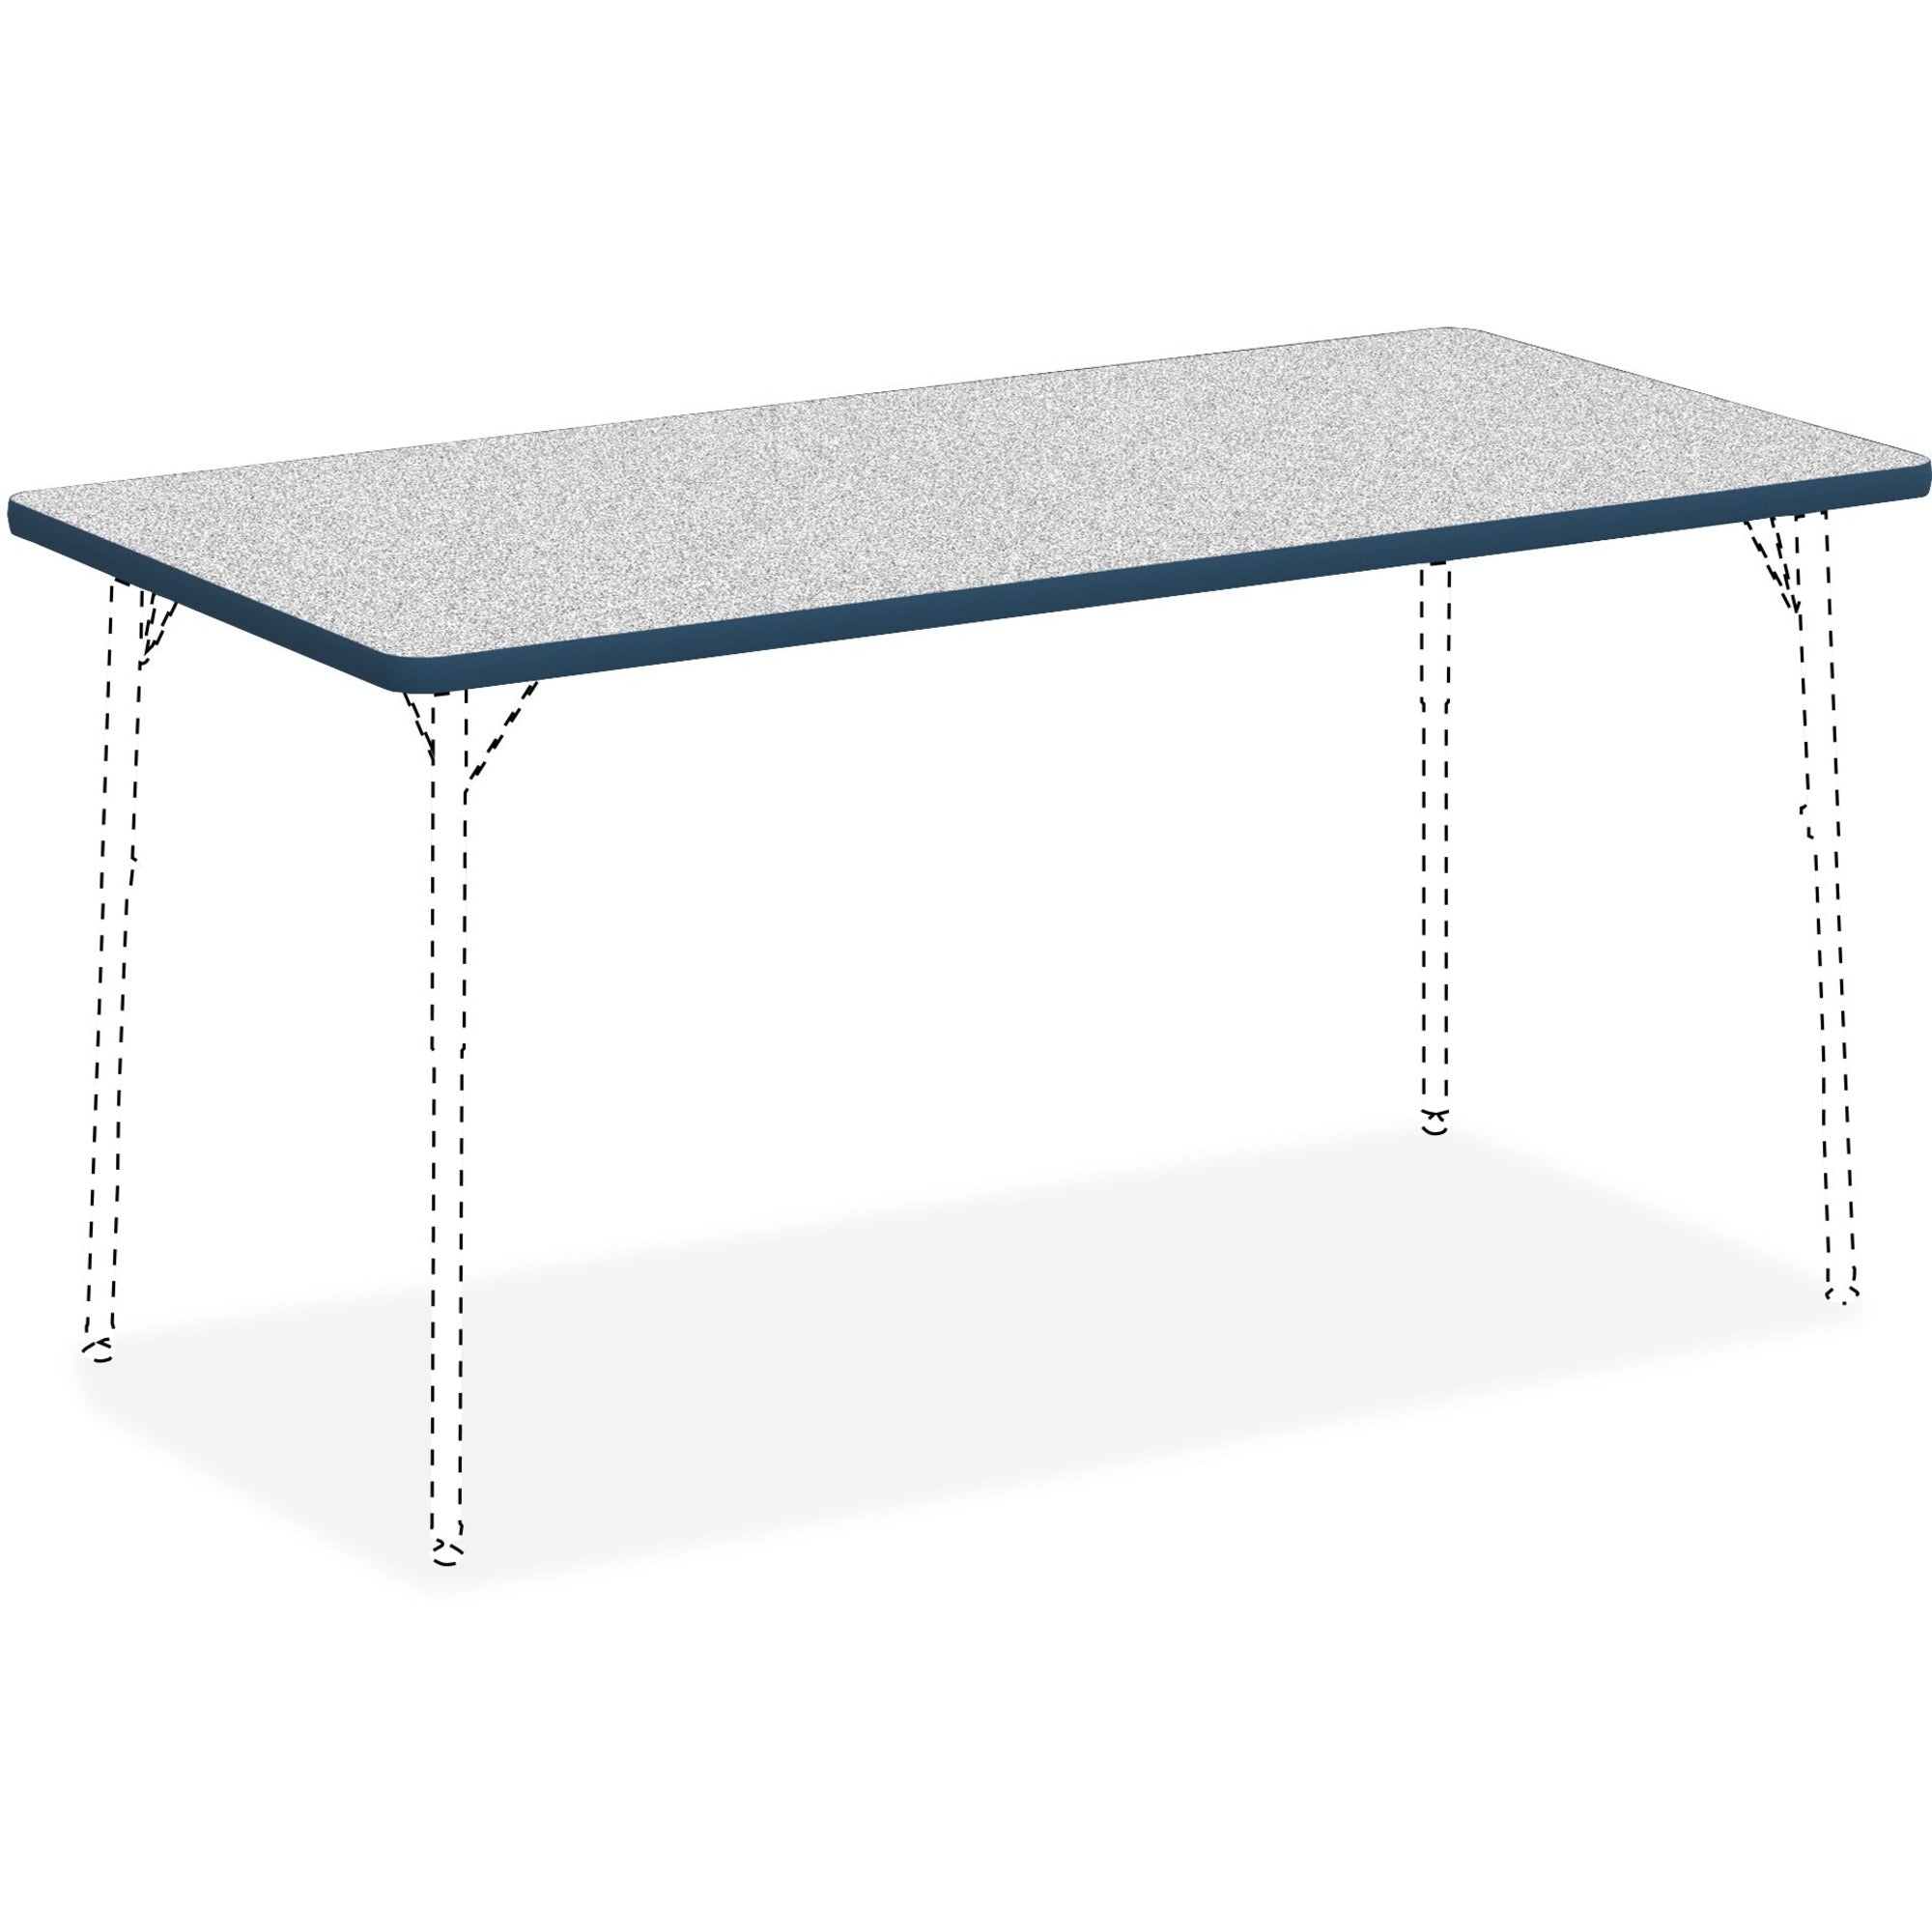 lorell-classroom-activity-tabletop-for-table-topgray-nebula-rectangle-high-pressure-laminate-hpl-top-x-60-table-top-width-x-30-table-top-depth-x-113-table-top-thickness-1-each_llr99918 - 1